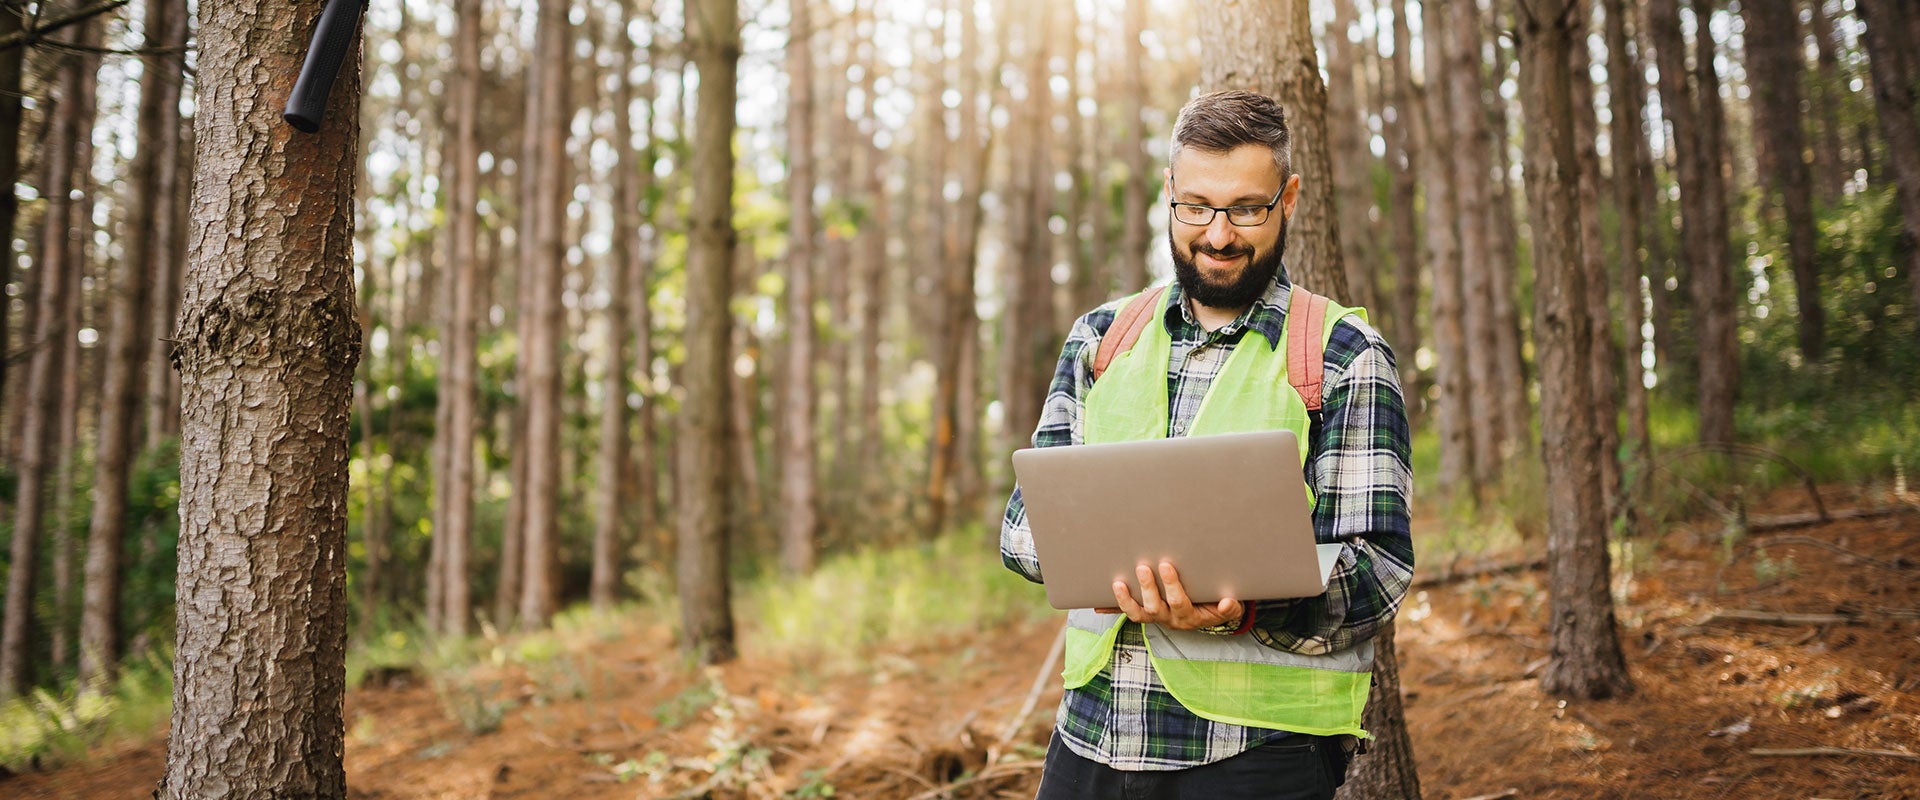 logger using laptop in forest